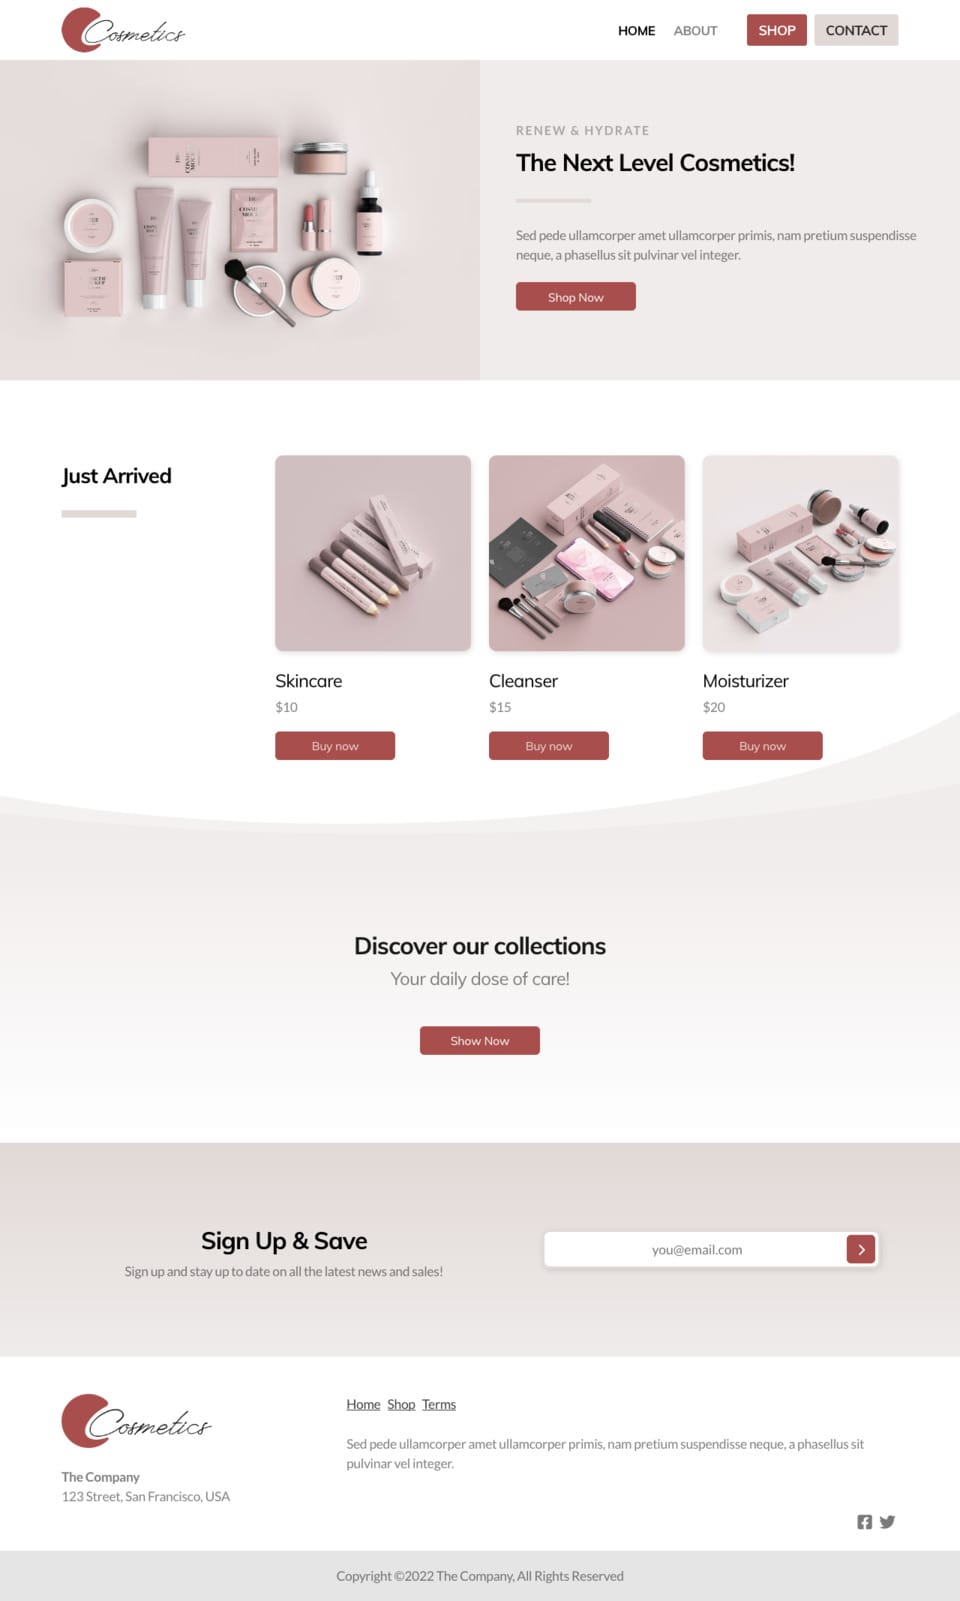 Cosmetics Website Template - Ideal for small businesses, beauty products, cosmetics, skincare, and fashion online stores.